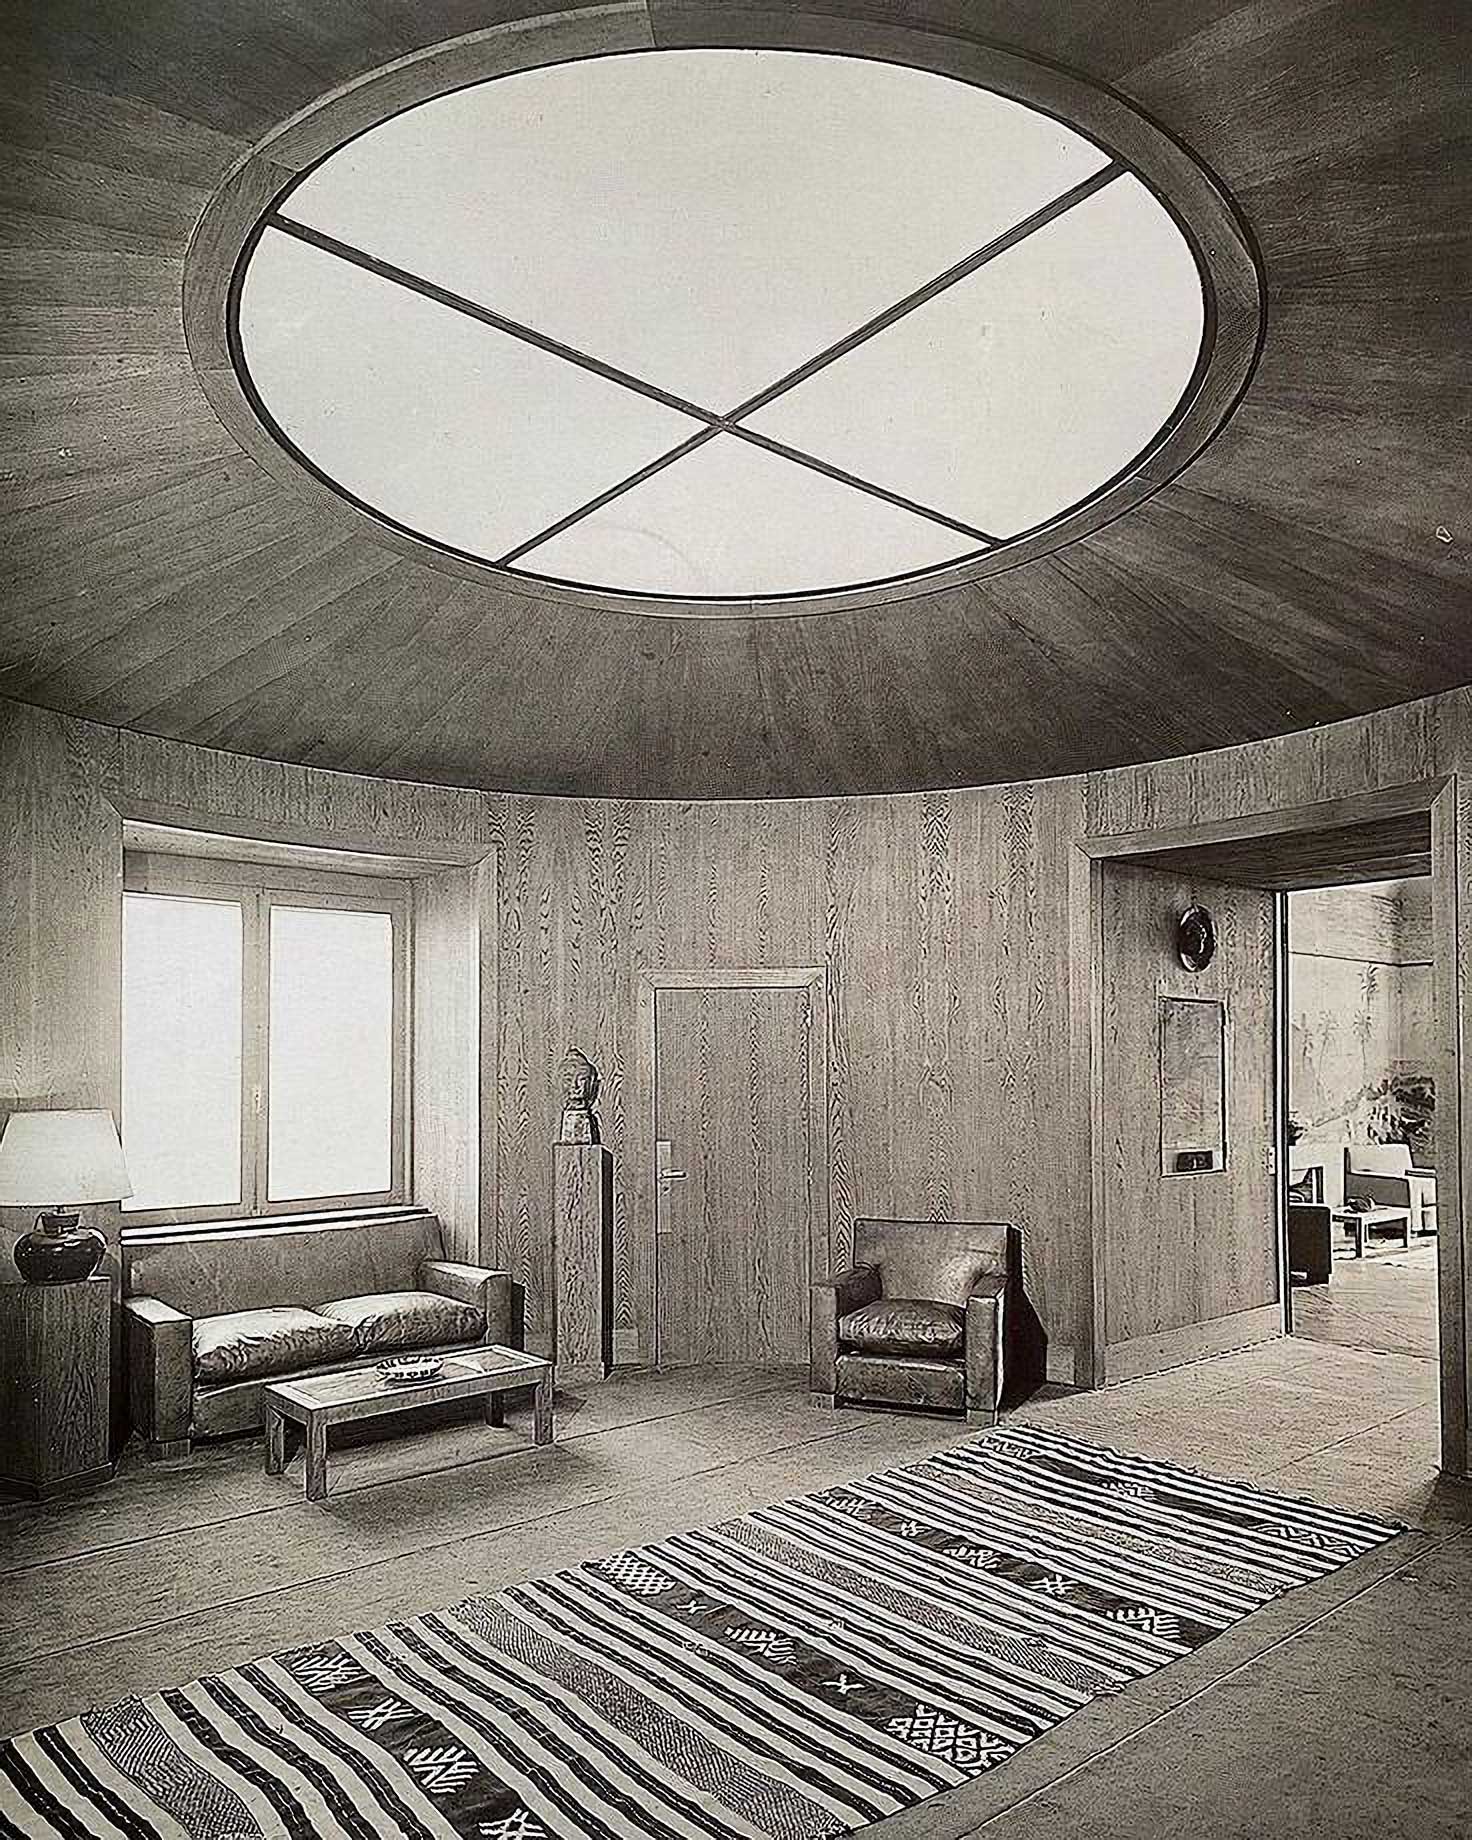 Monochrome photograph of an apartment with large circular skylight